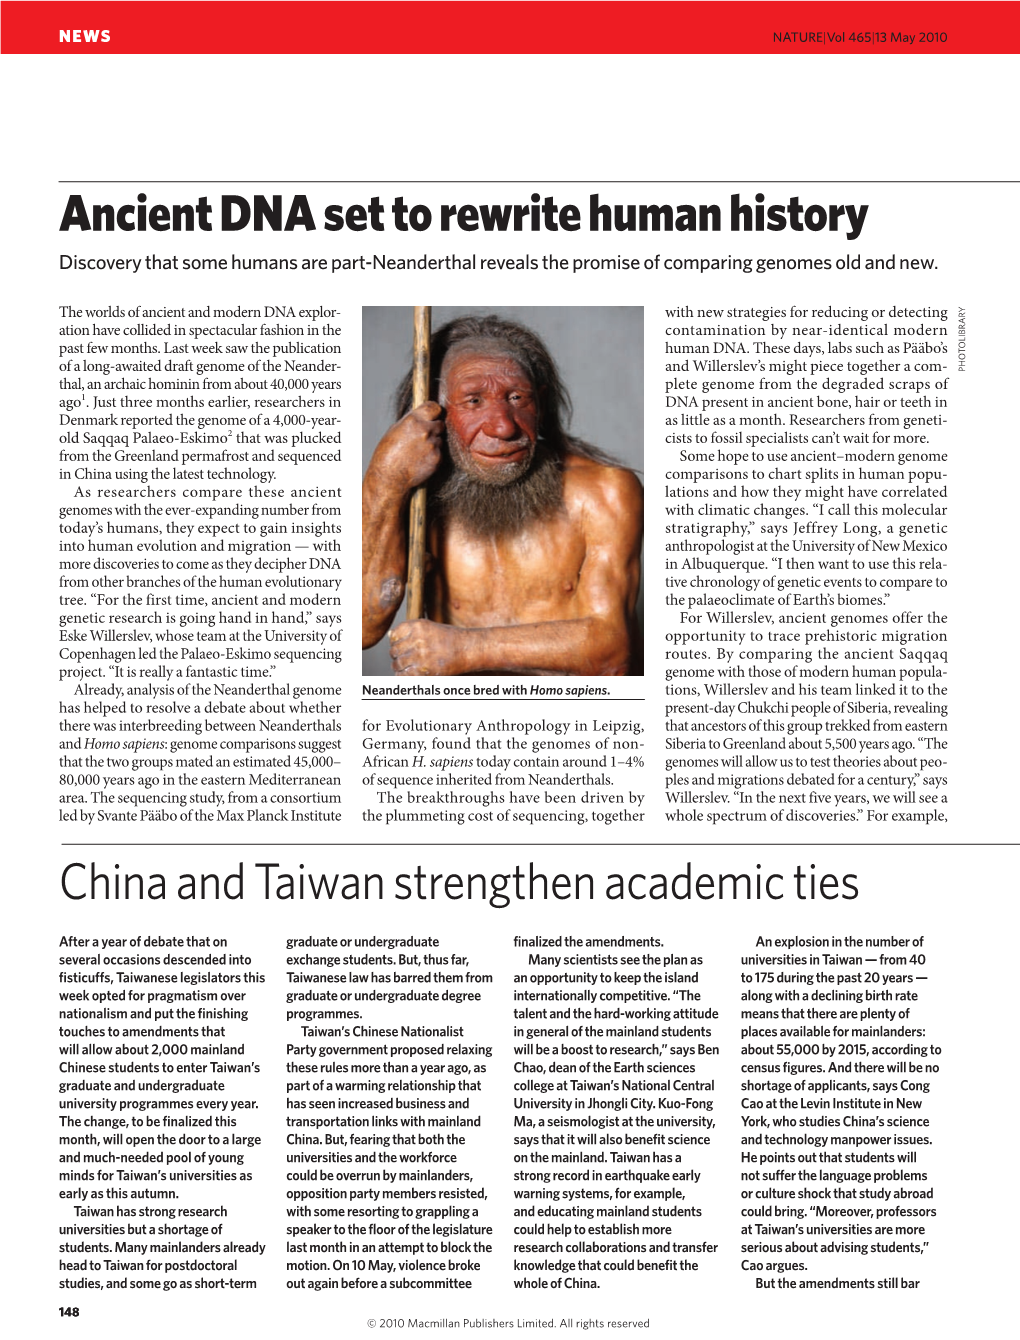 Ancient DNA Set to Rewrite Human History China and Taiwan Strengthen Academic Ties